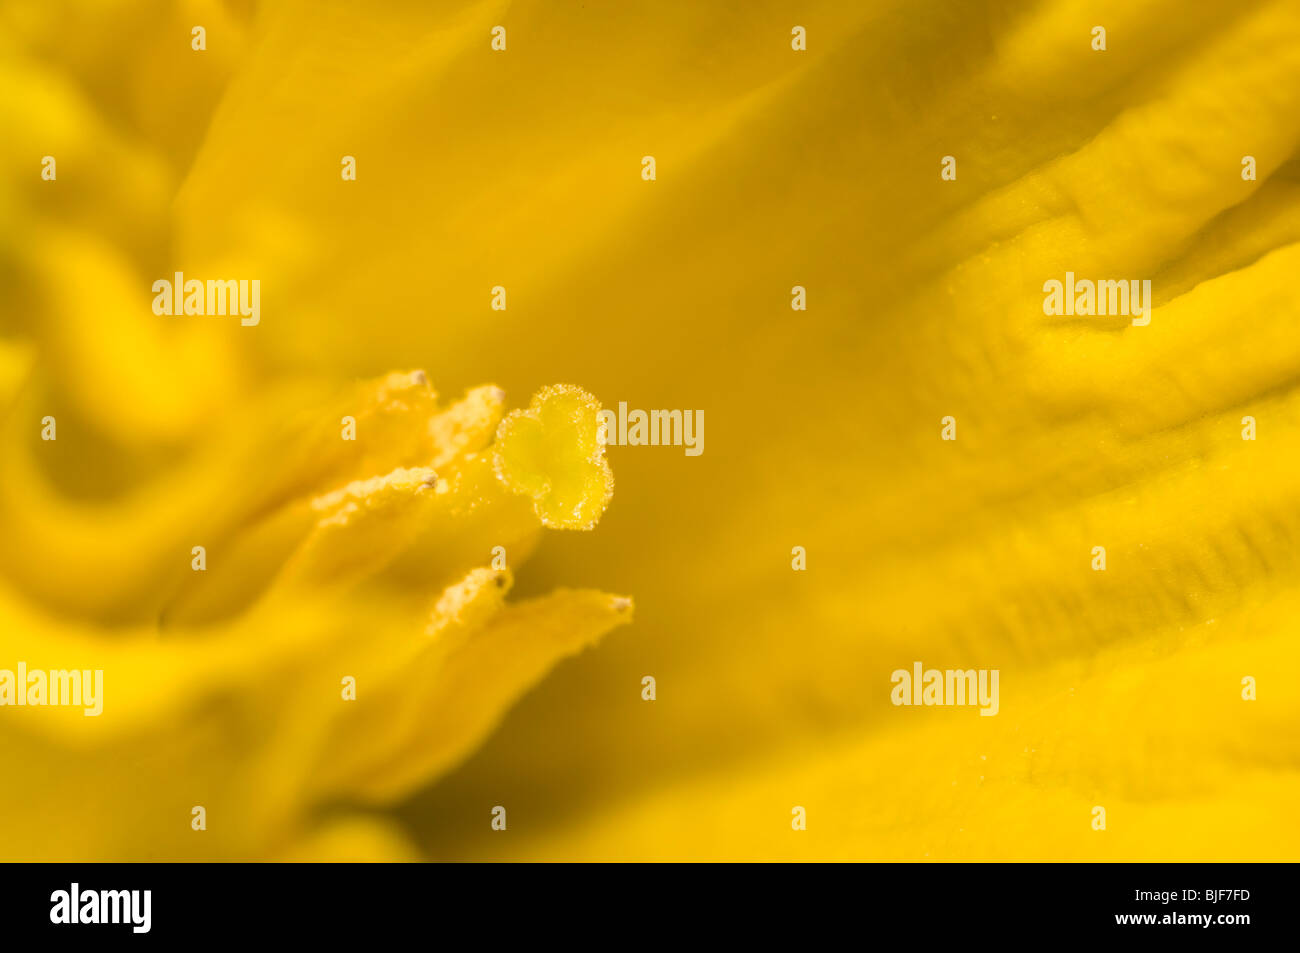 close up daffodil (narcissus) flower in spring Stock Photo